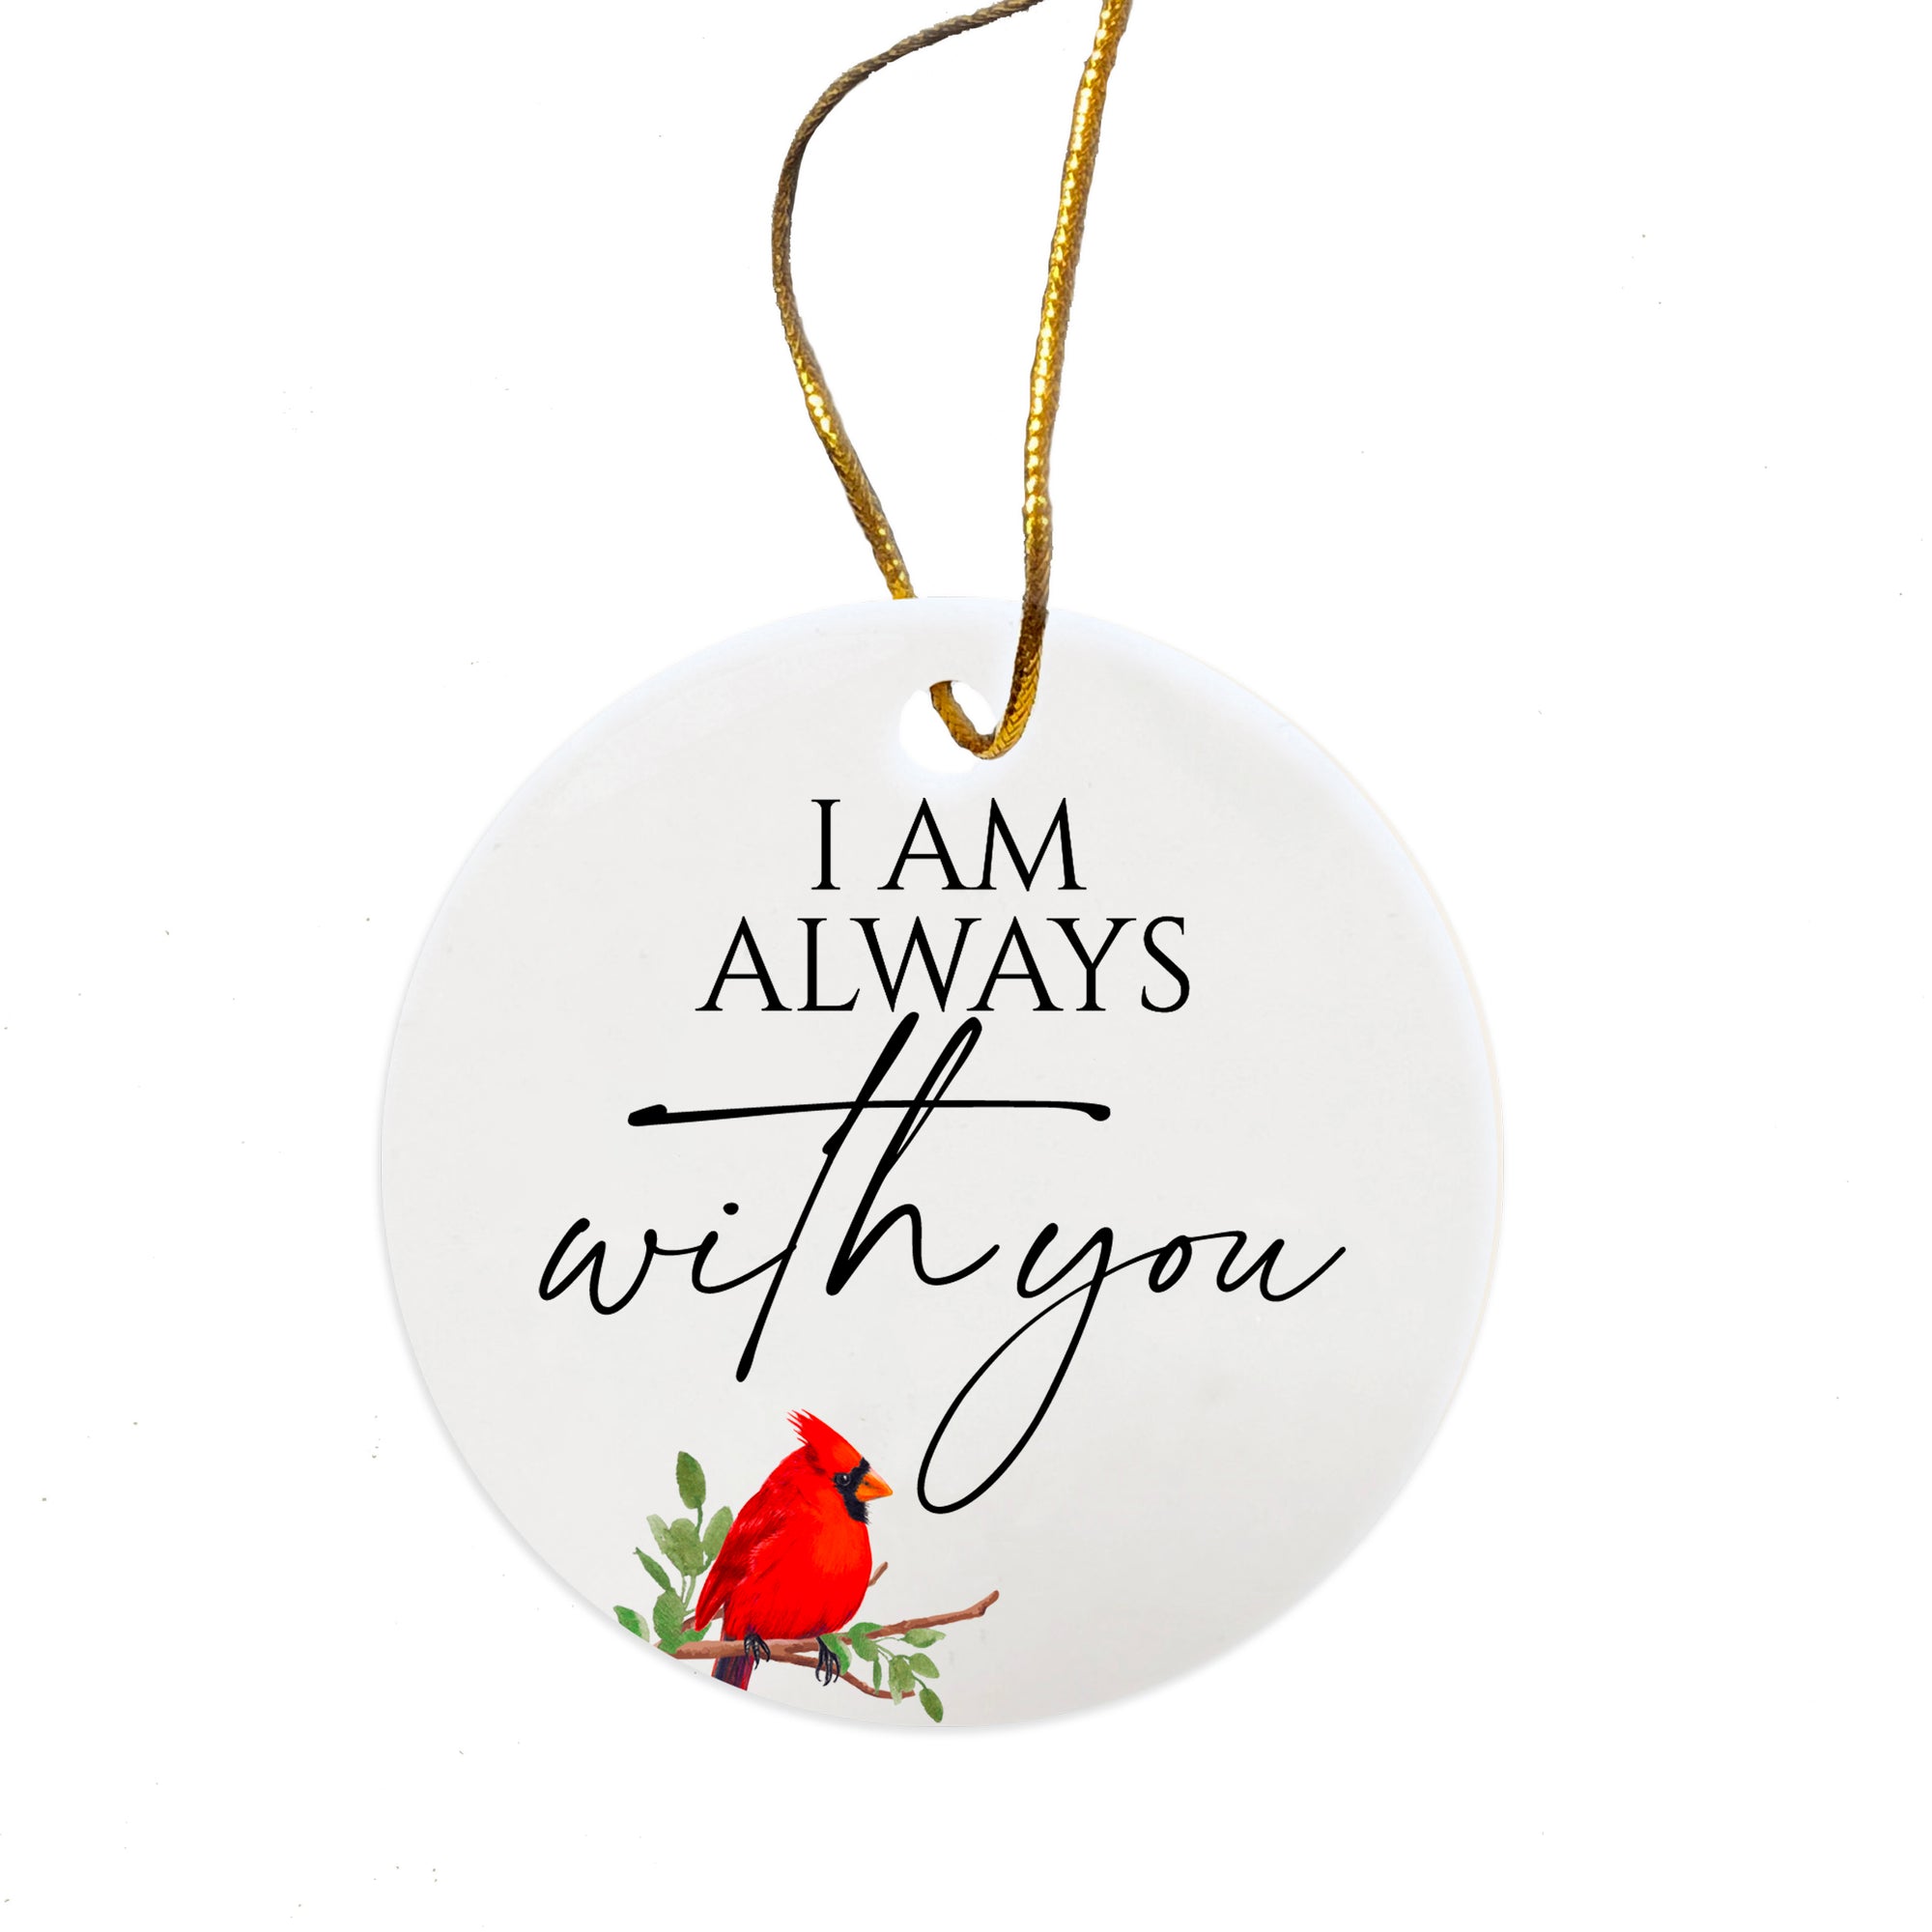 White Ceramic Cardinal Ornament With Everyday Verses Gift Ideas - I Am Always